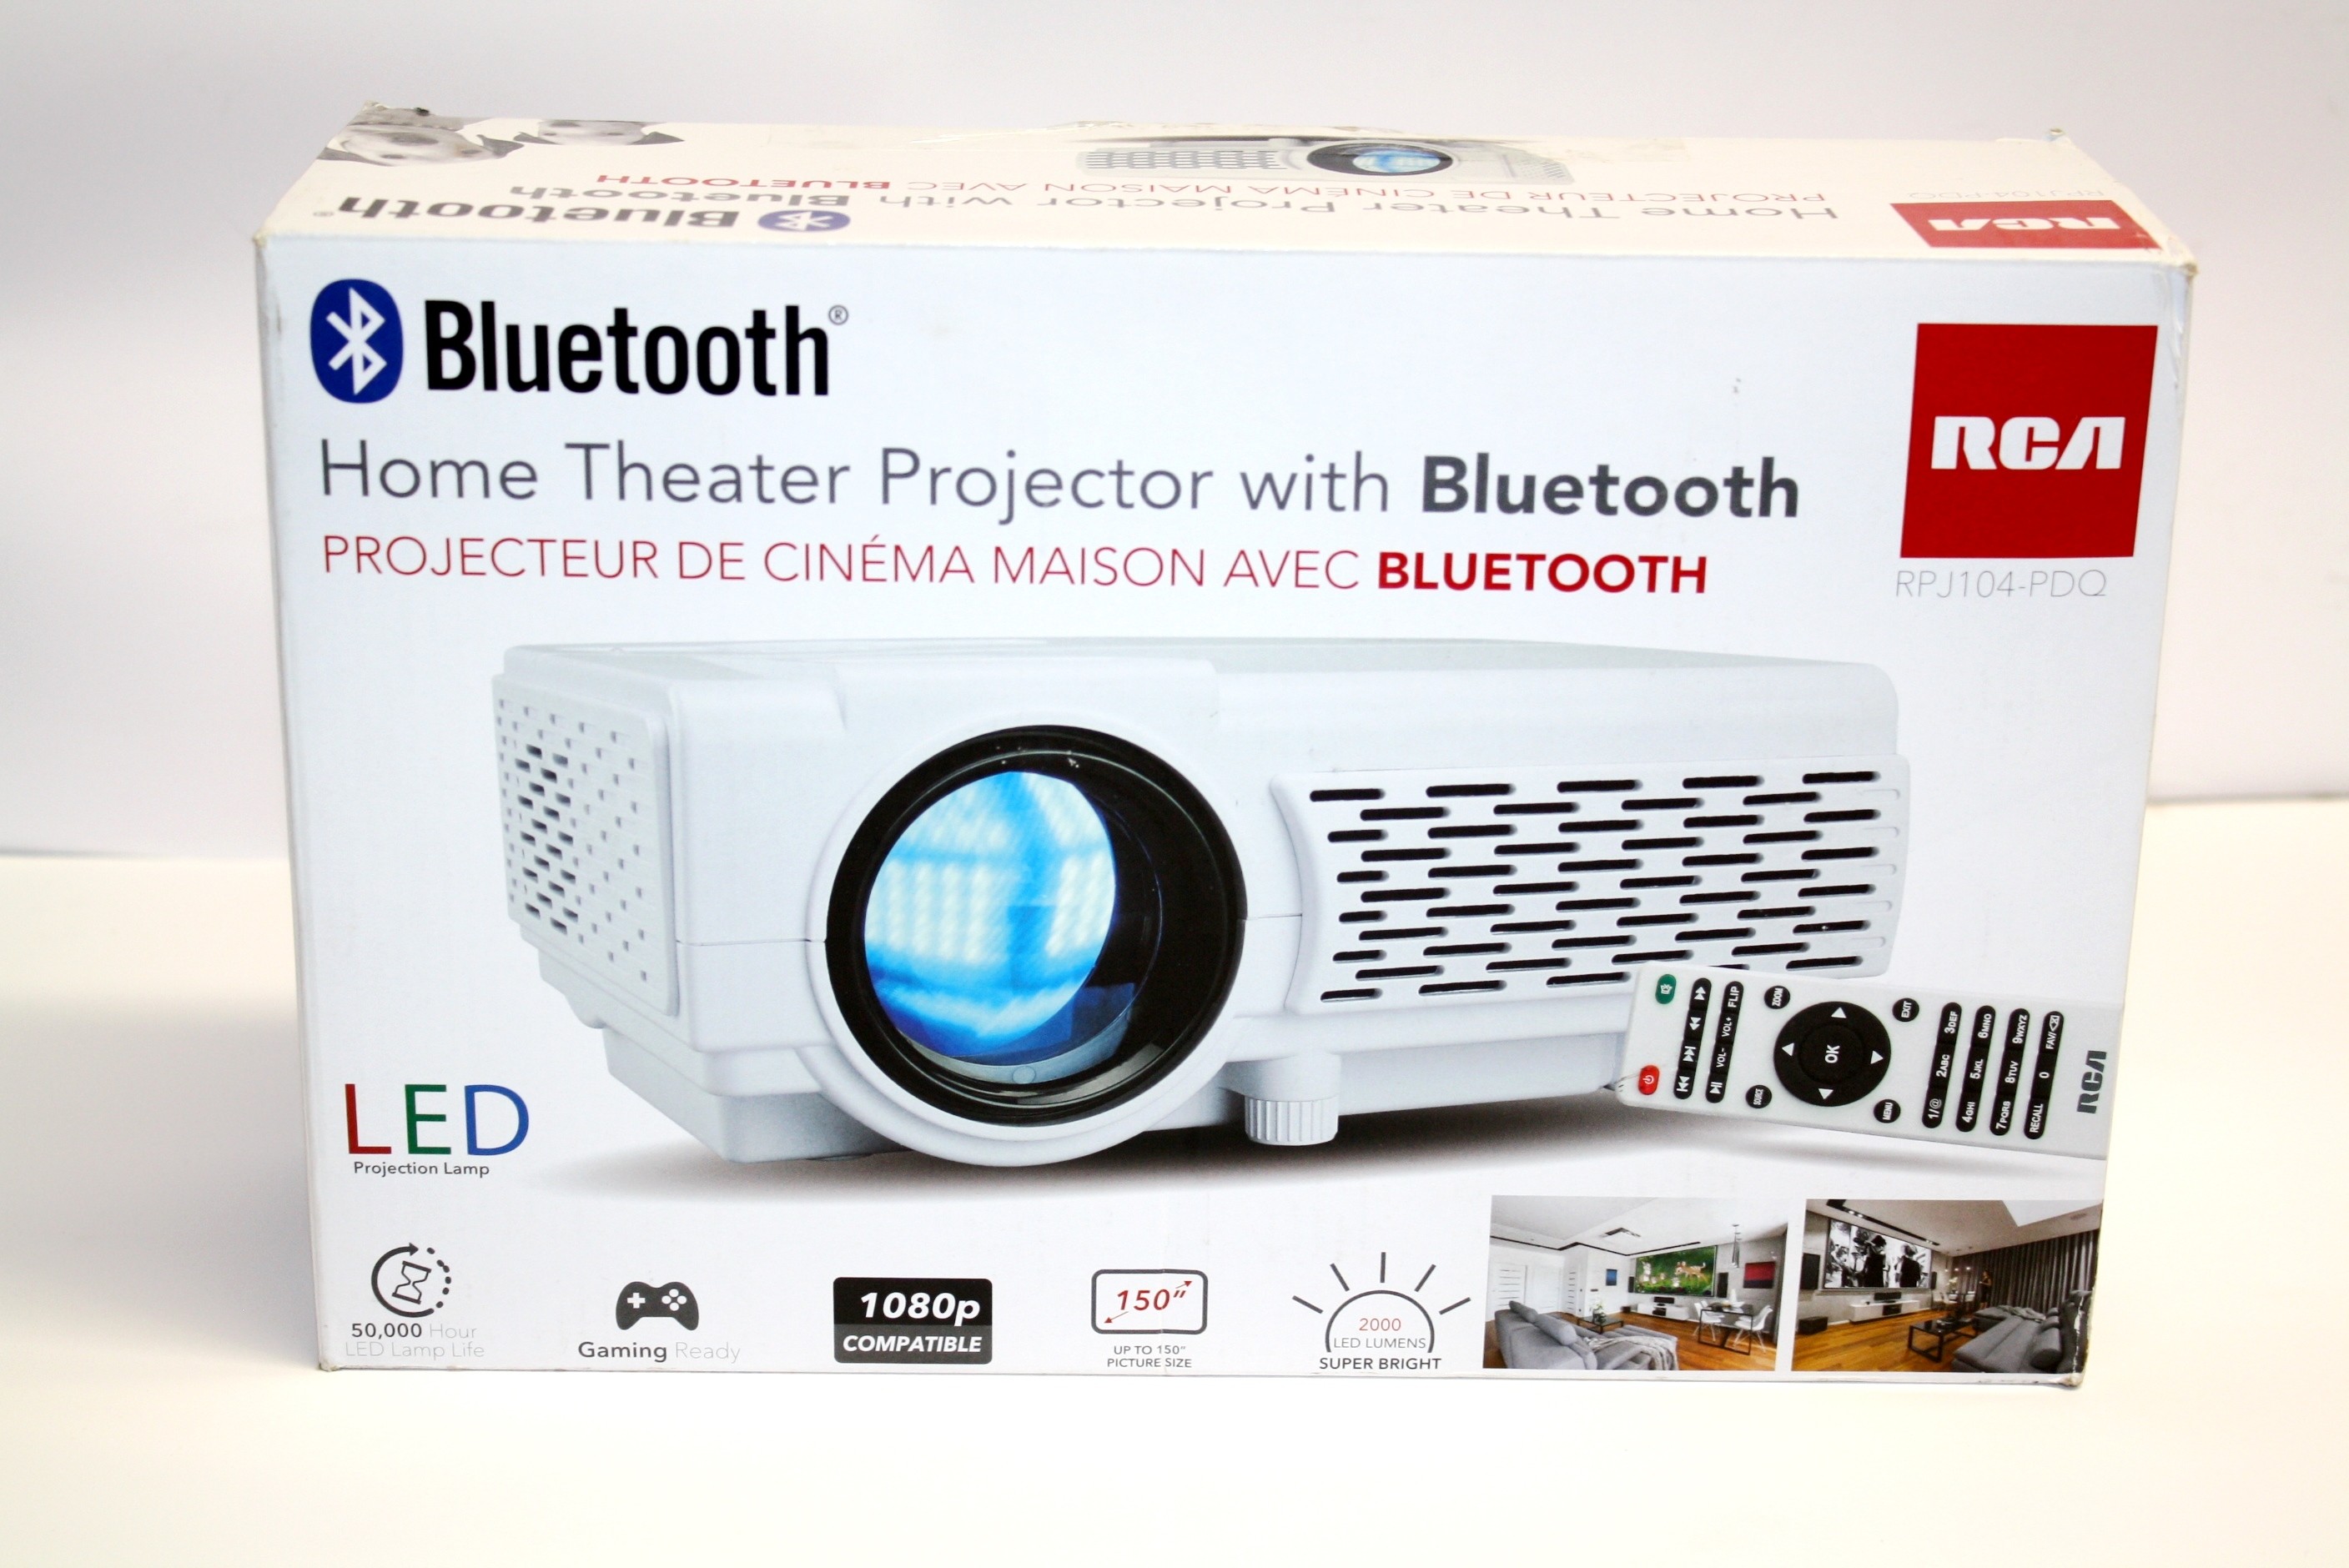 RCA Bluetooth 1080p Home Theatre Projector Renewed 